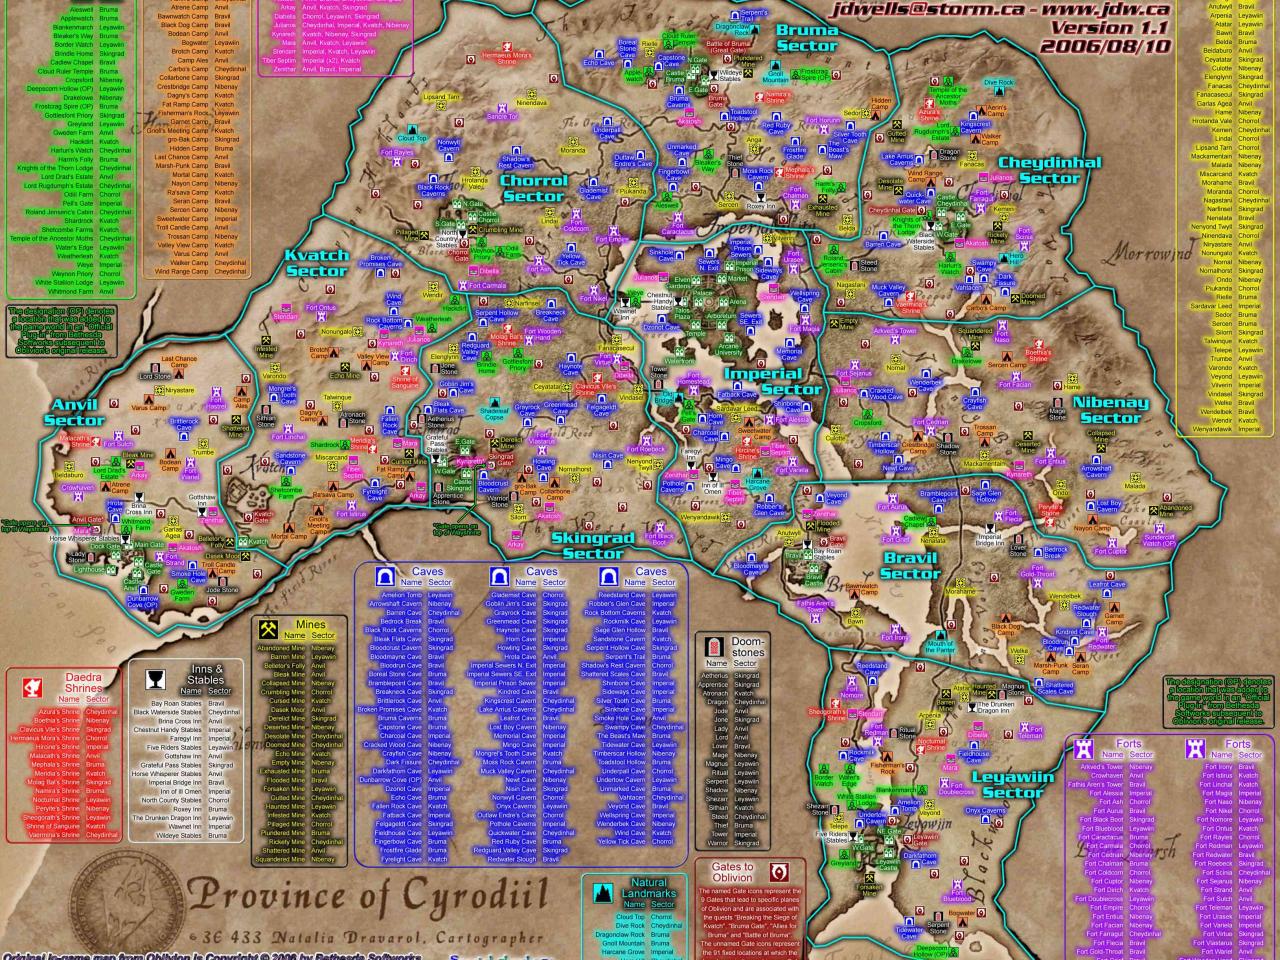 The Elder Scrolls IV: Oblivion Annotated And Interactive Maps